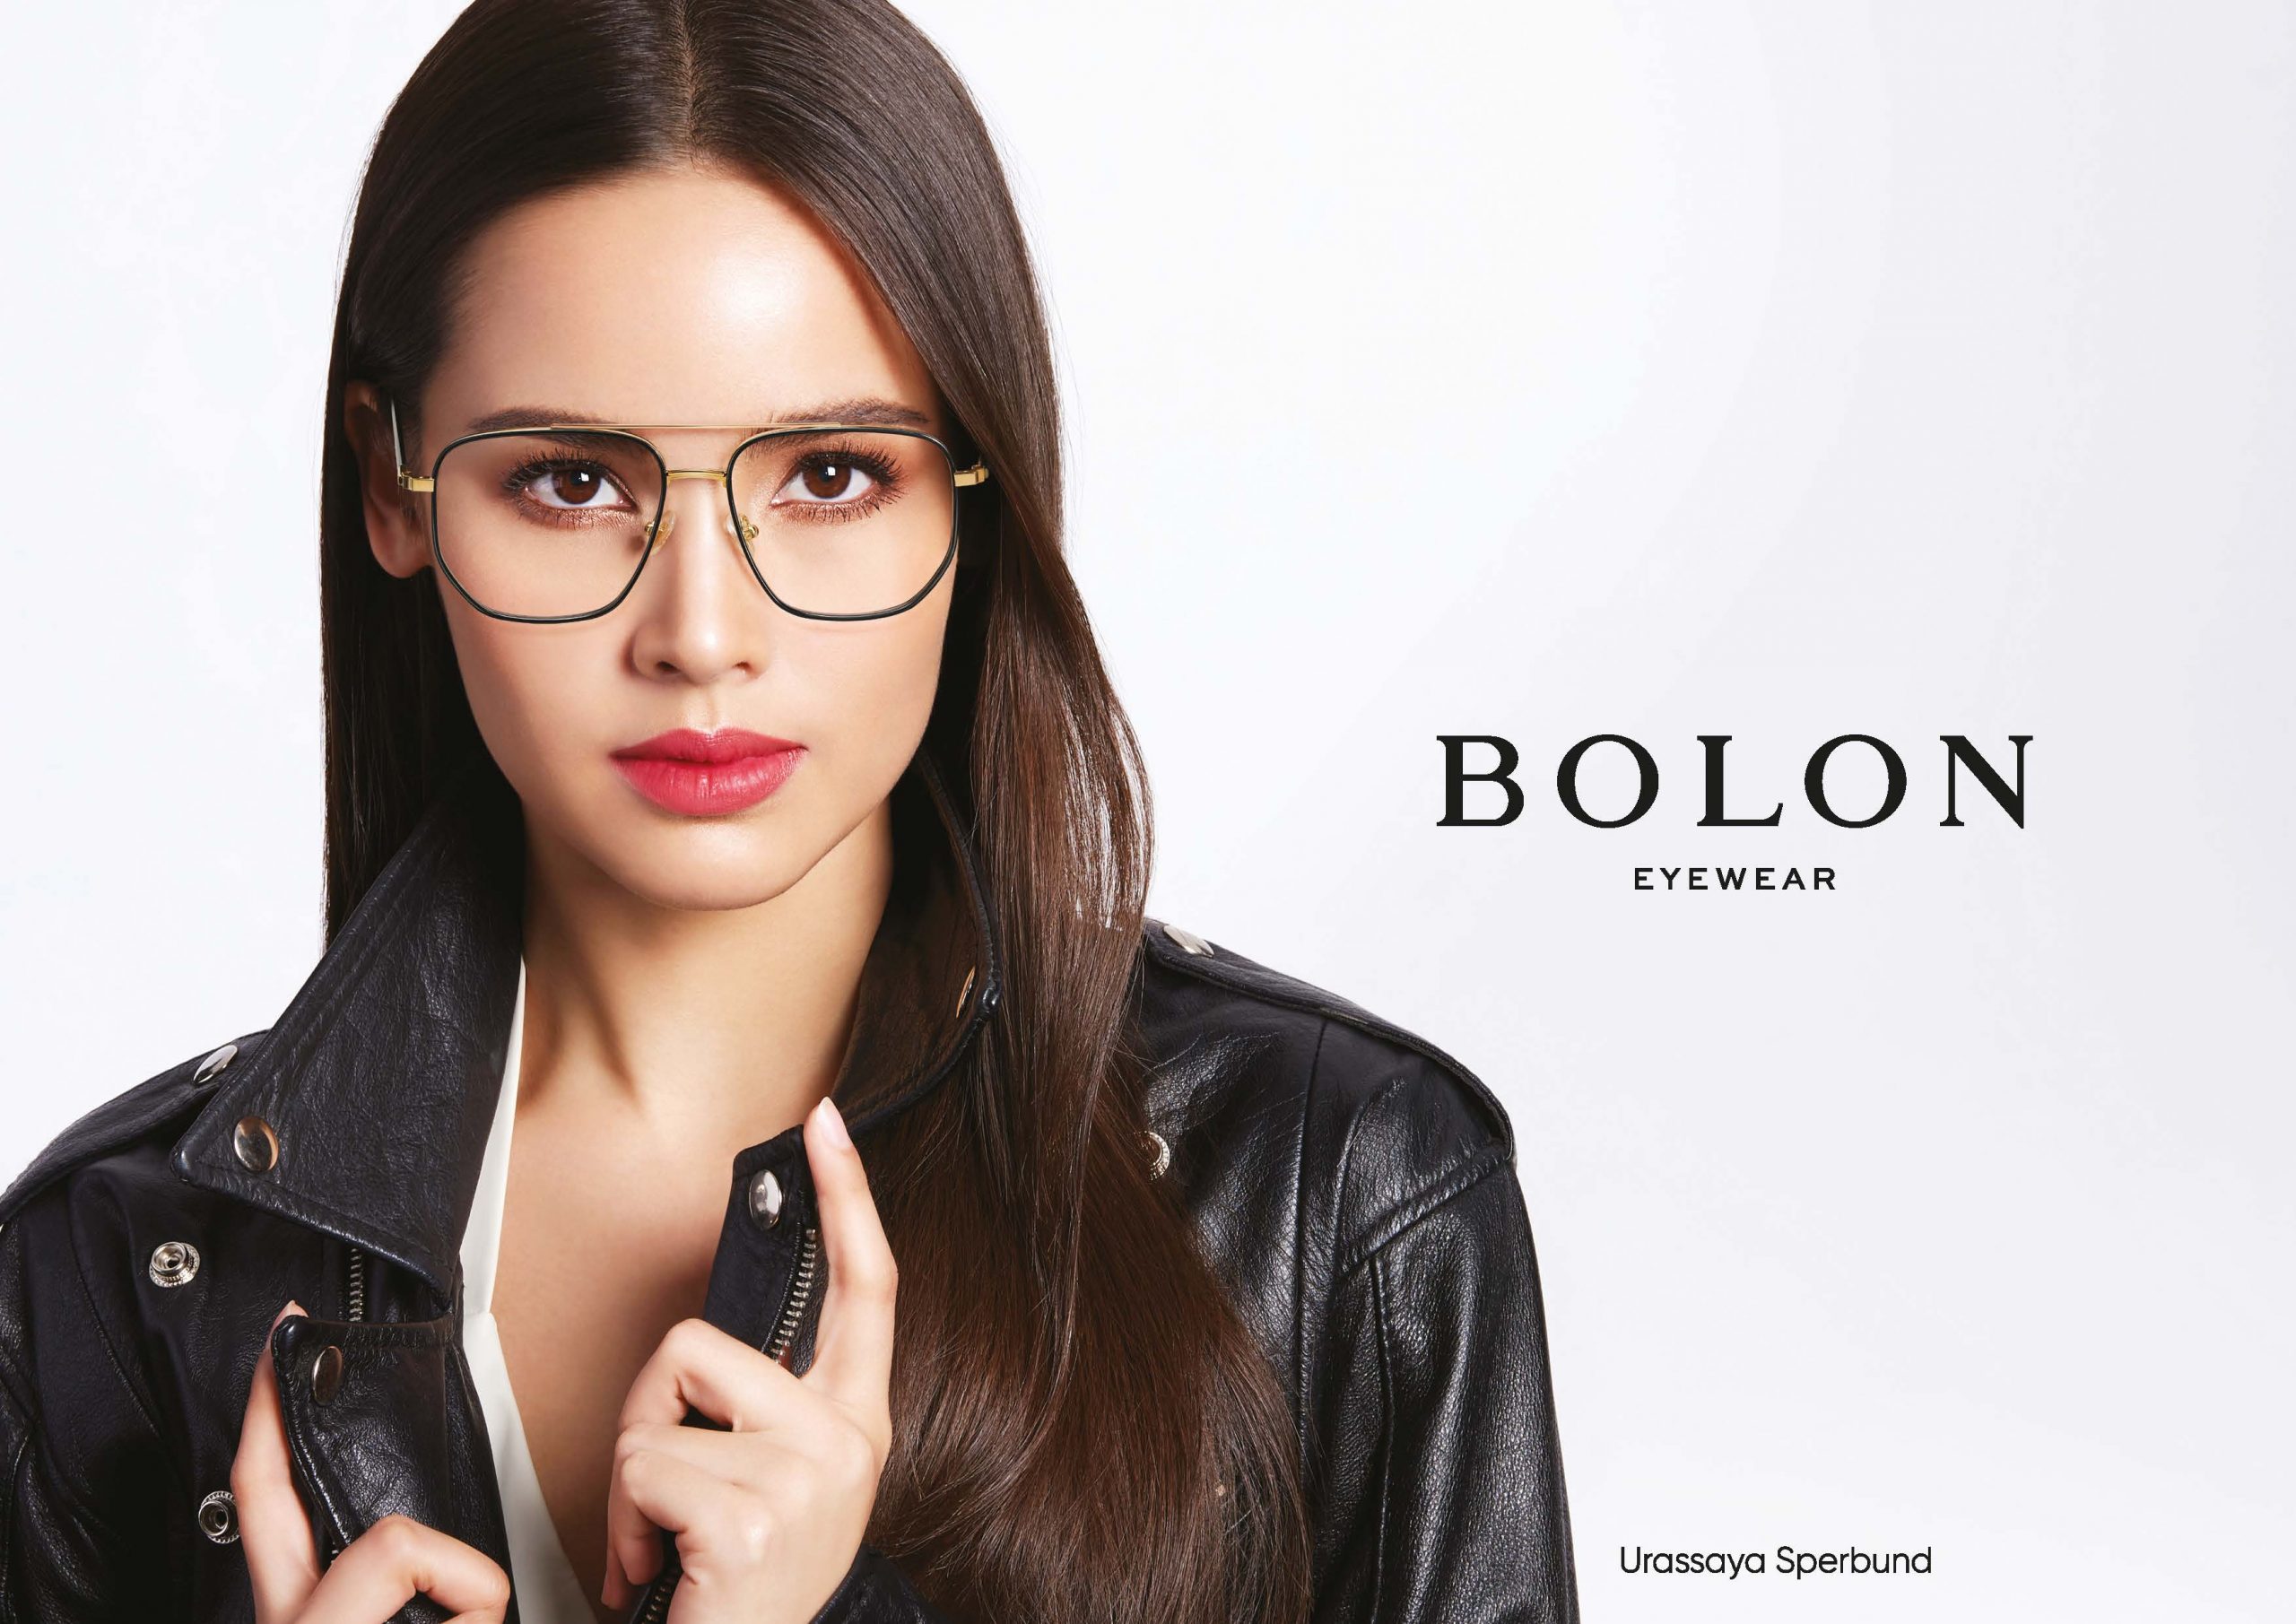 Yaya Urassaya encourages glasses wearers to feel confident and fashionable in the new Bolon Eyewear Fall/Winter 2020 Collection